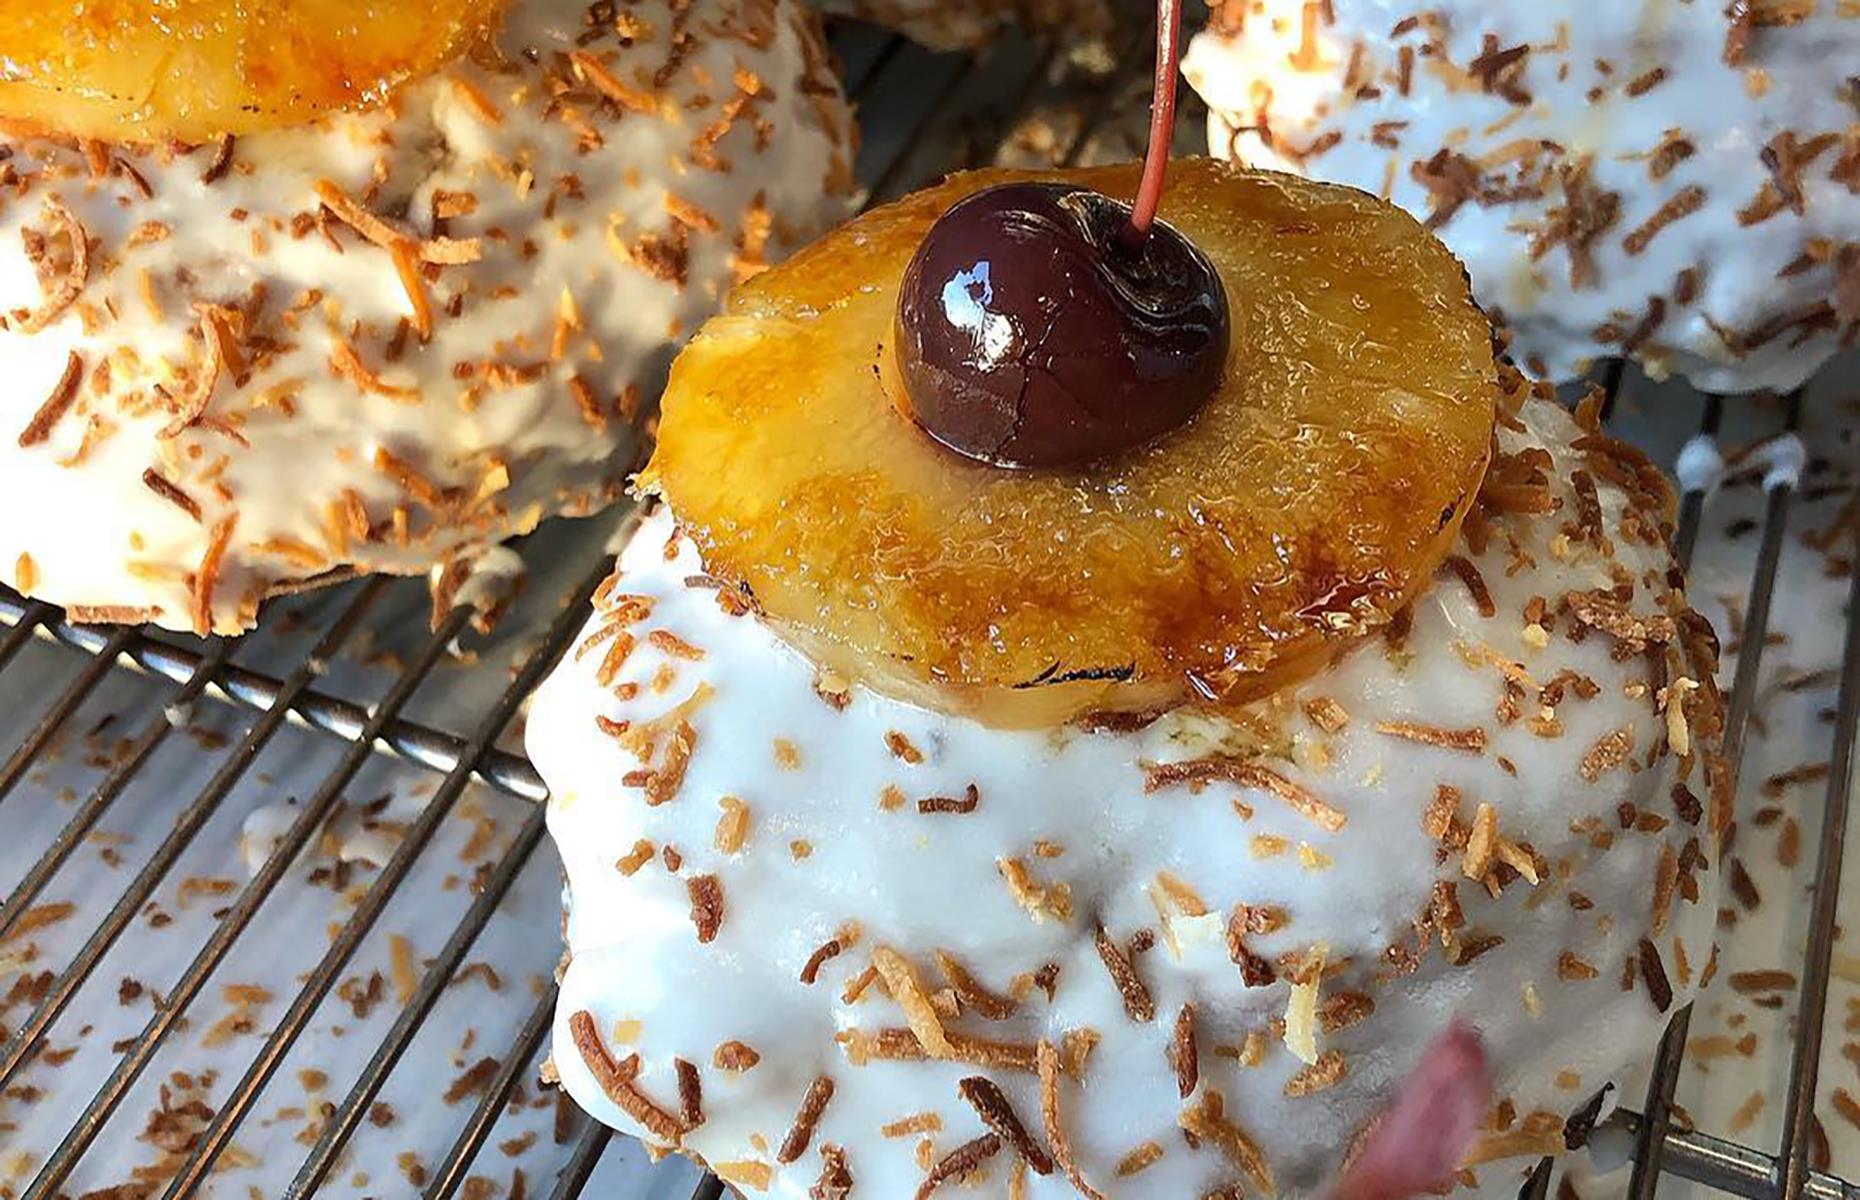 <p>If you like piña coladas (and whether or not you like getting caught in the rain), you would love this special creation from <a href="https://www.districtdonuts.com/">District</a> in New Orleans. The limited-edition donut was inspired by the classic holiday cocktail with a generous smothering of frosting, plenty of desiccated coconut and a topping of caramelized pineapple and a maraschino cherry.</p>